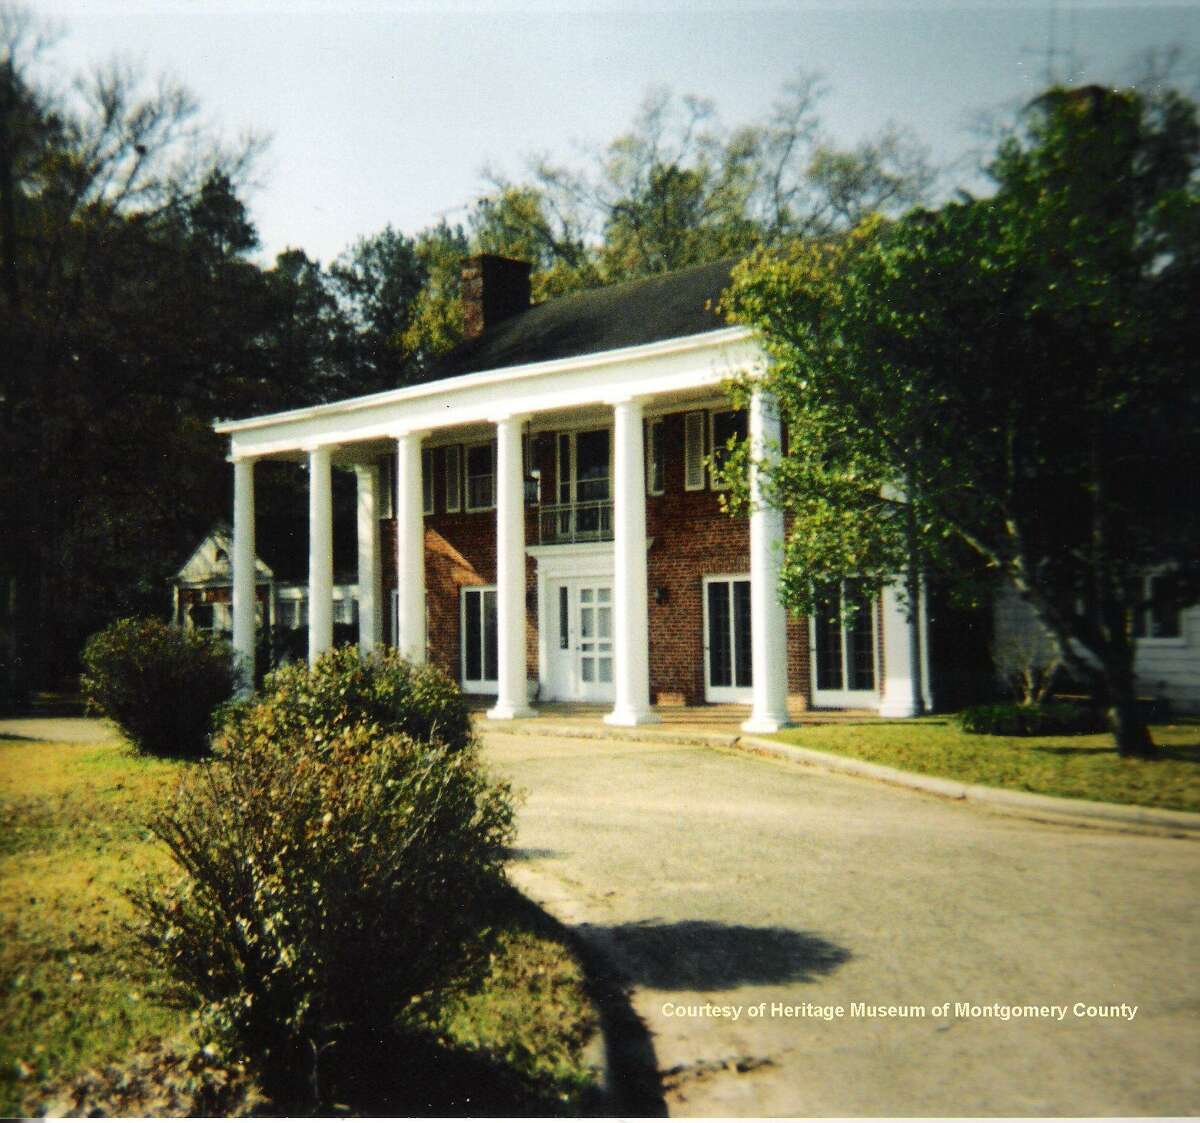 The Hooper house on Frazier Street in Conroe. The residence was built in 1939 on 25 acres and was lived in by family members through 1976. It became weathered by time and was torn down in the early 2000s.